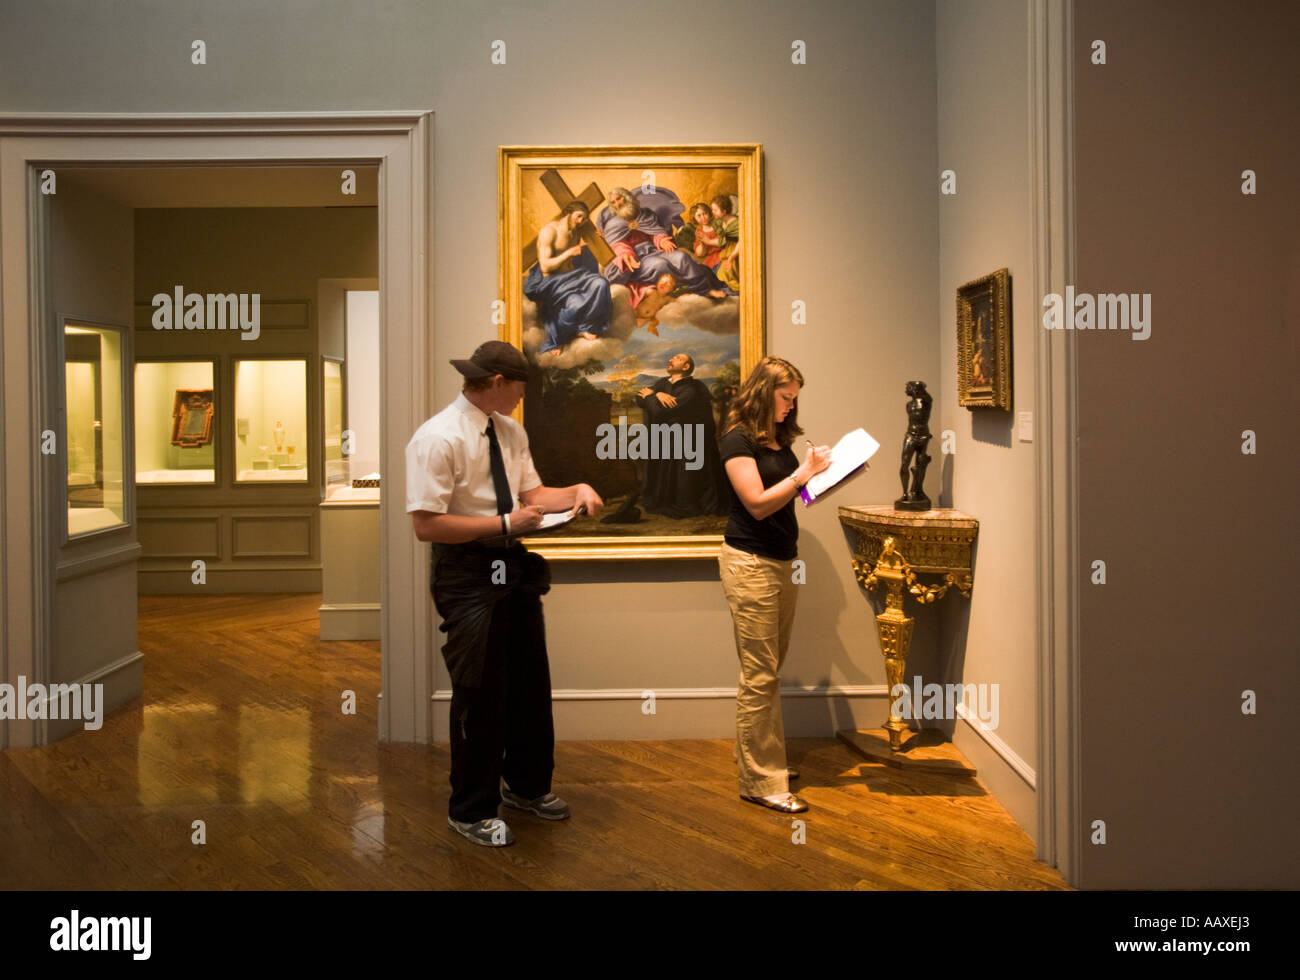 Galleries at Los Angeles County Museum of Art LACMA California United States of America Stock Photo